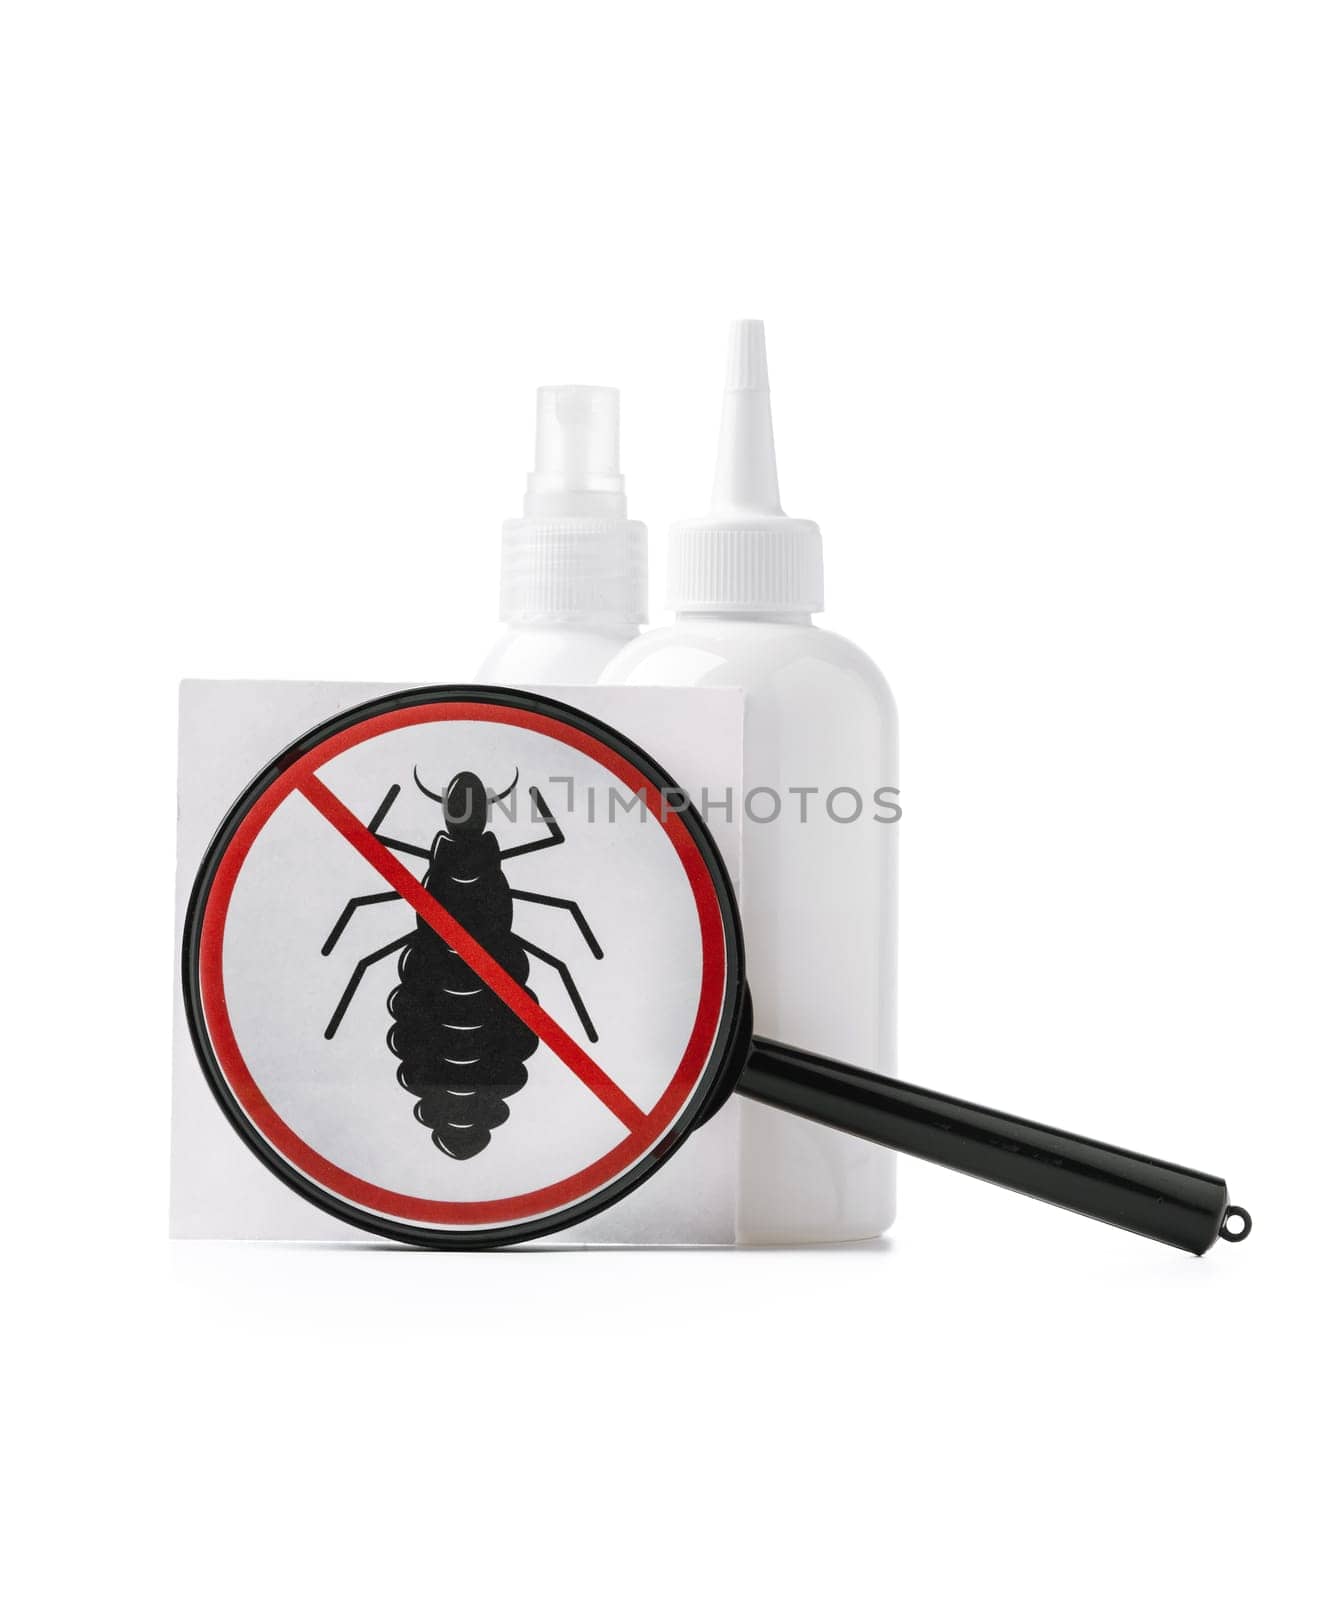 Cosmetic products, lice comb and magnifying glass isolated on white by Fabrikasimf